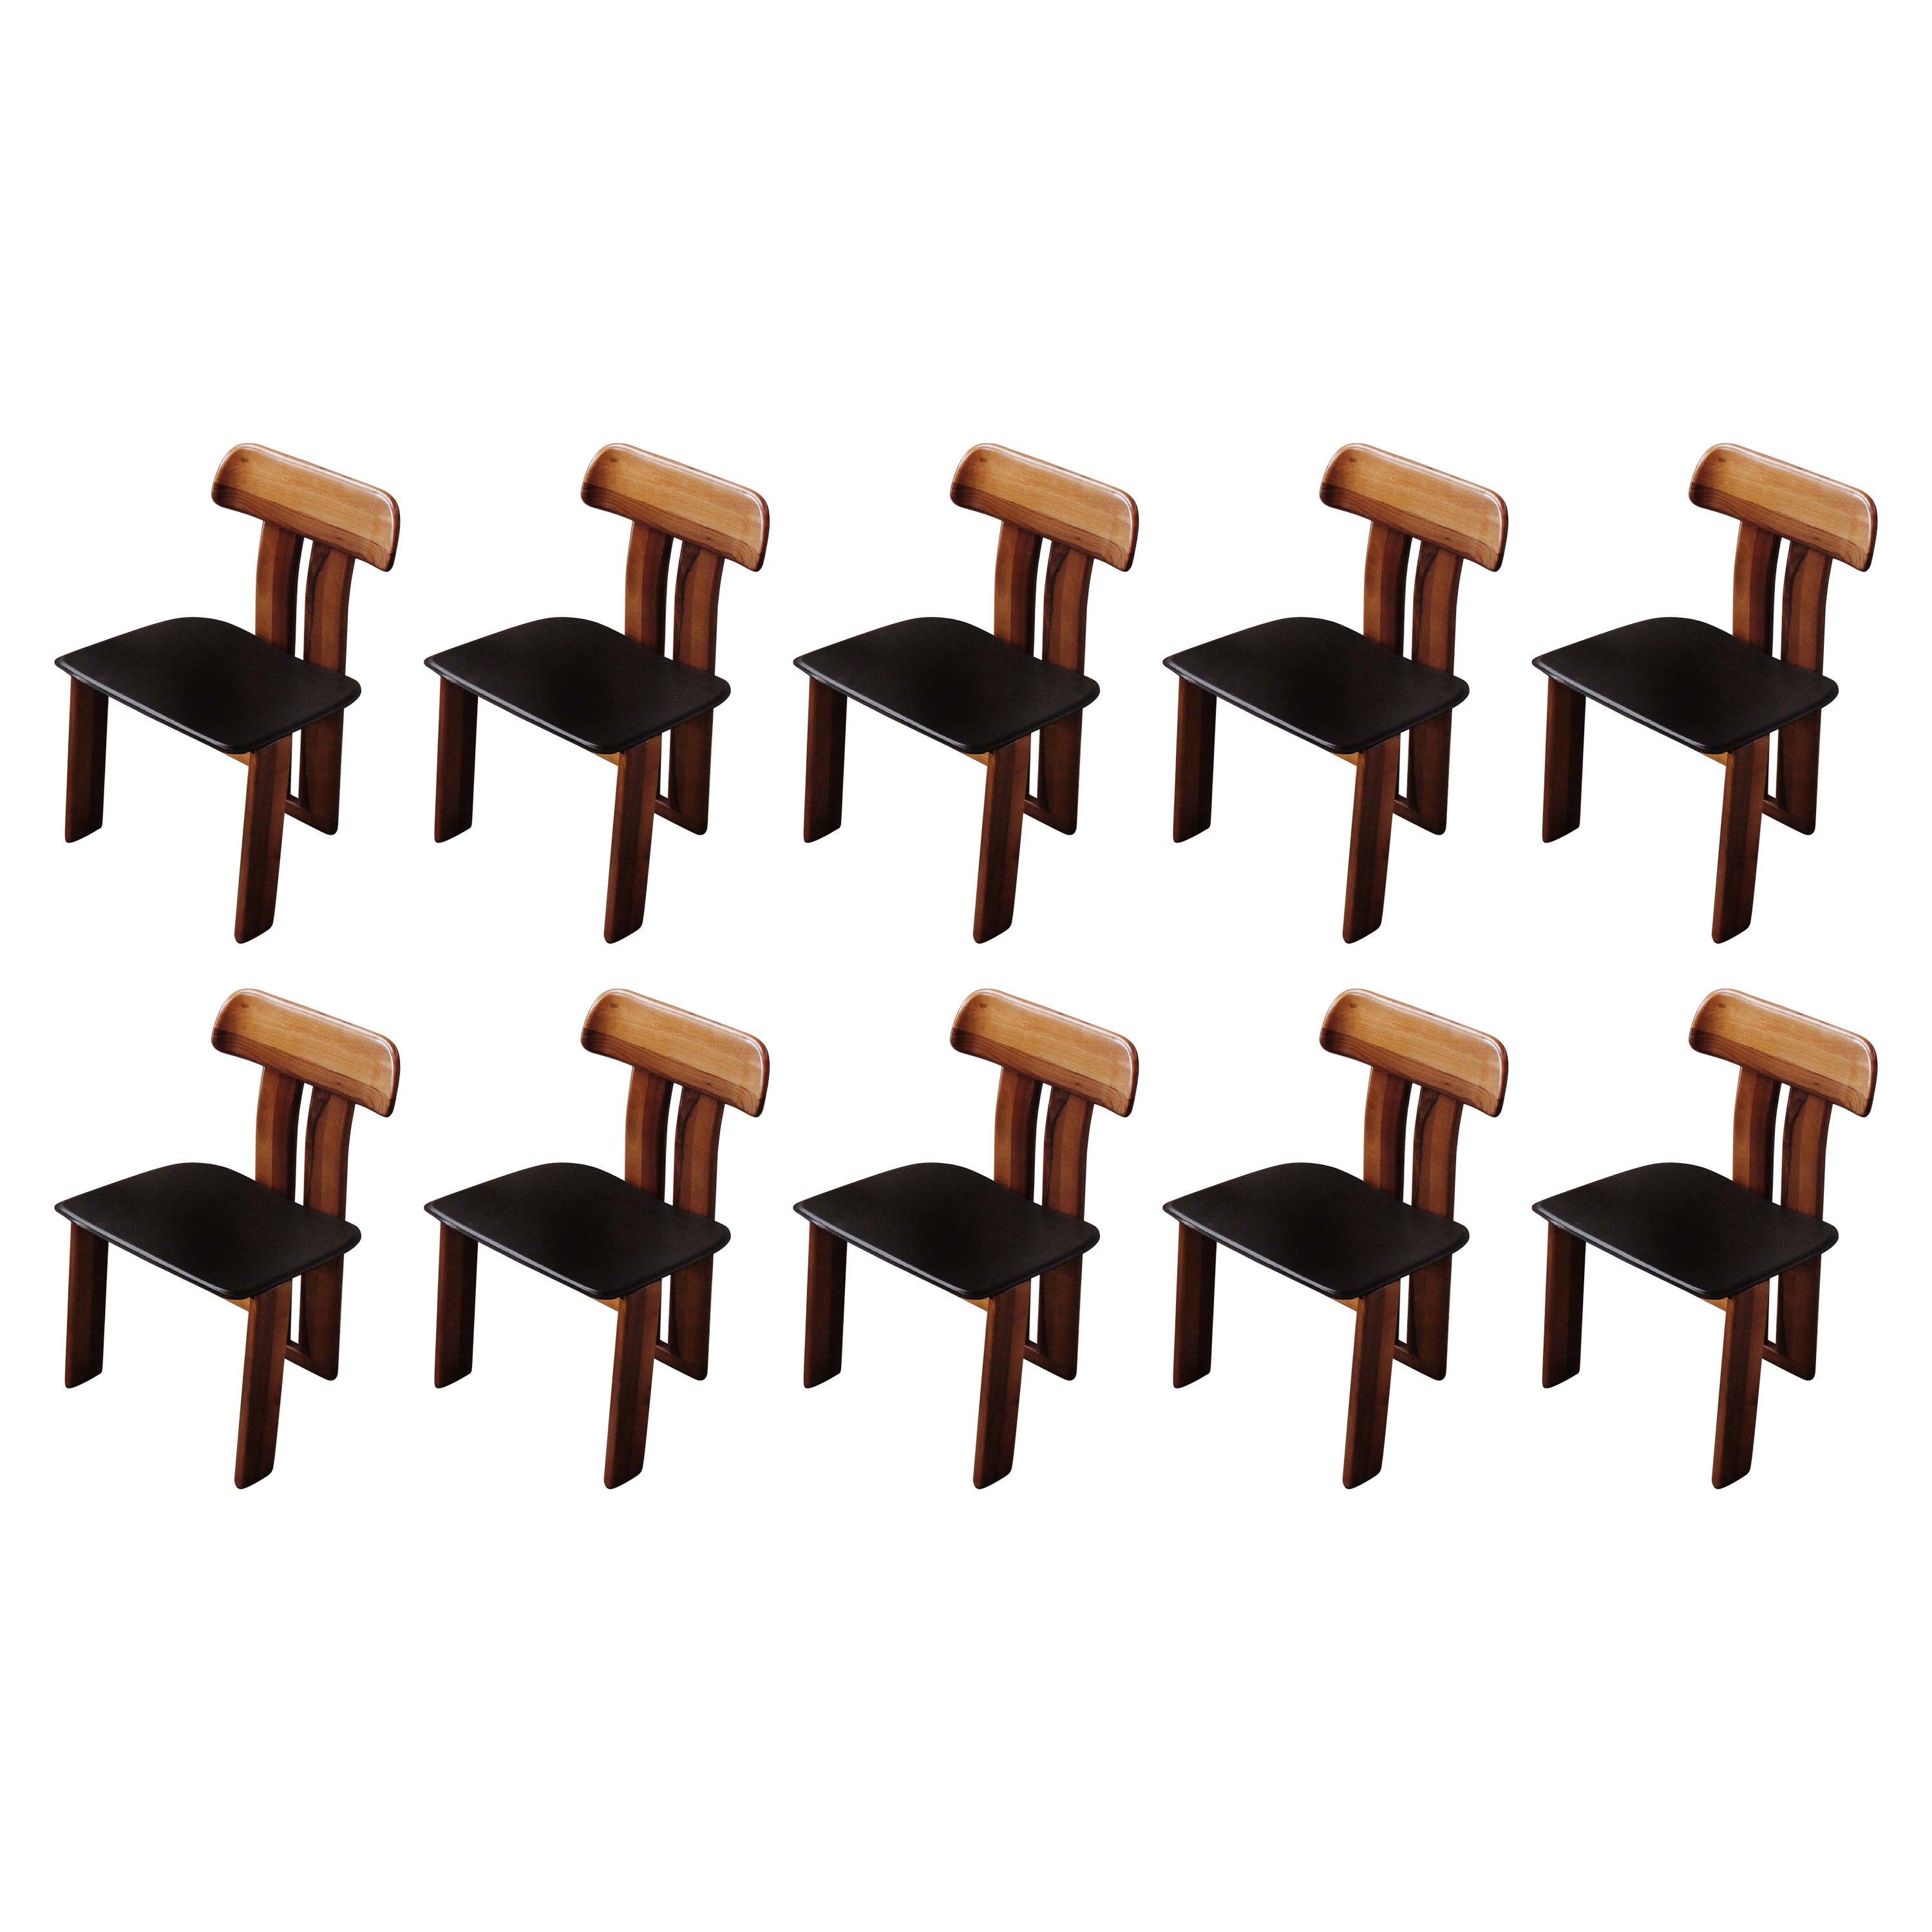 Mario Marenco "Sapporo" Chairs for Mobil Girgi, 1970, Set of 10 For Sale